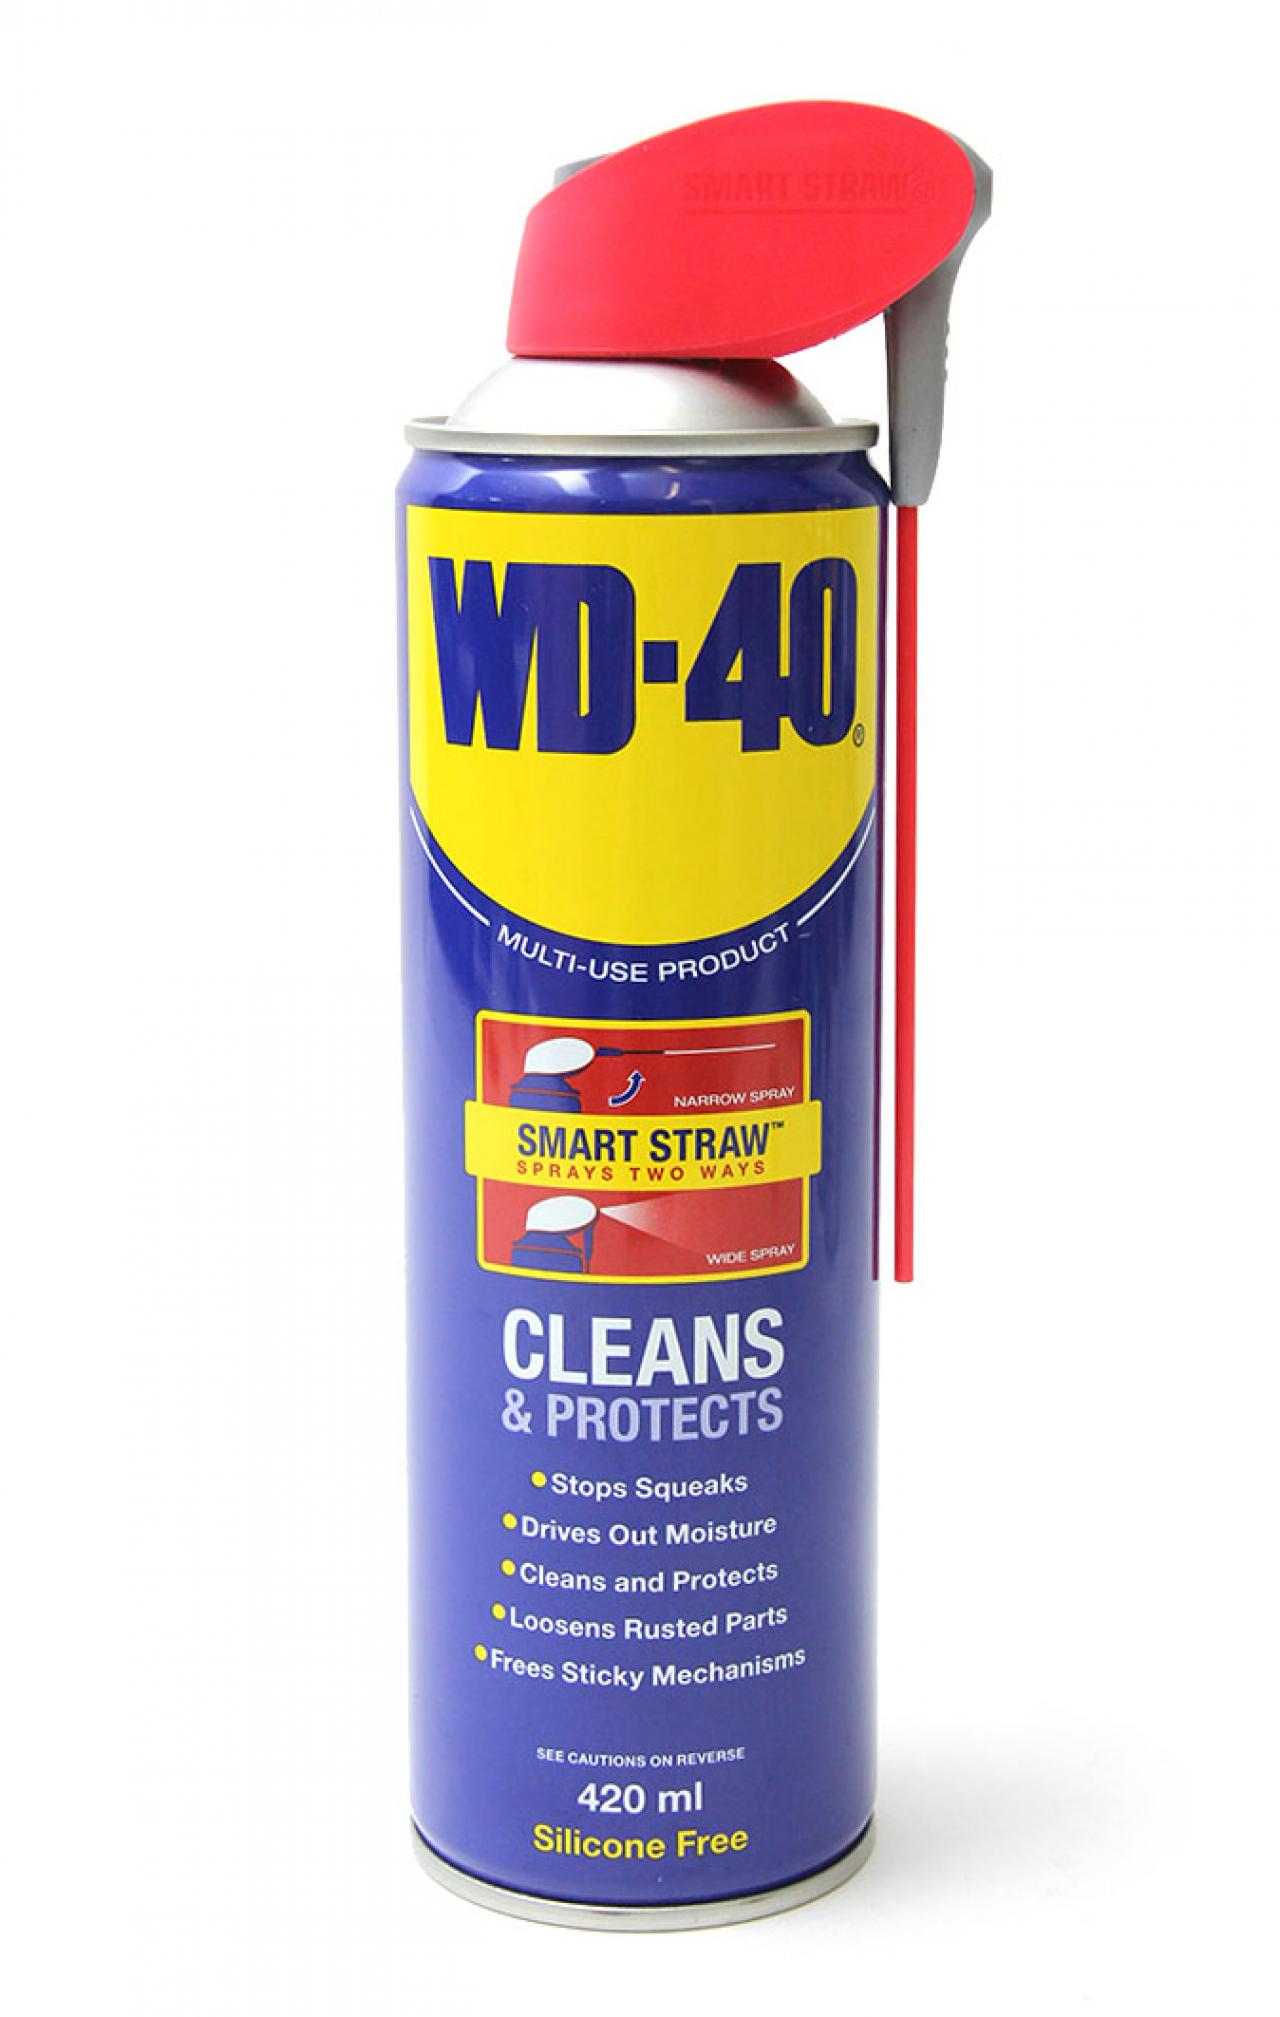 WD-40 Specialist Products Review - Pro Tool Reviews